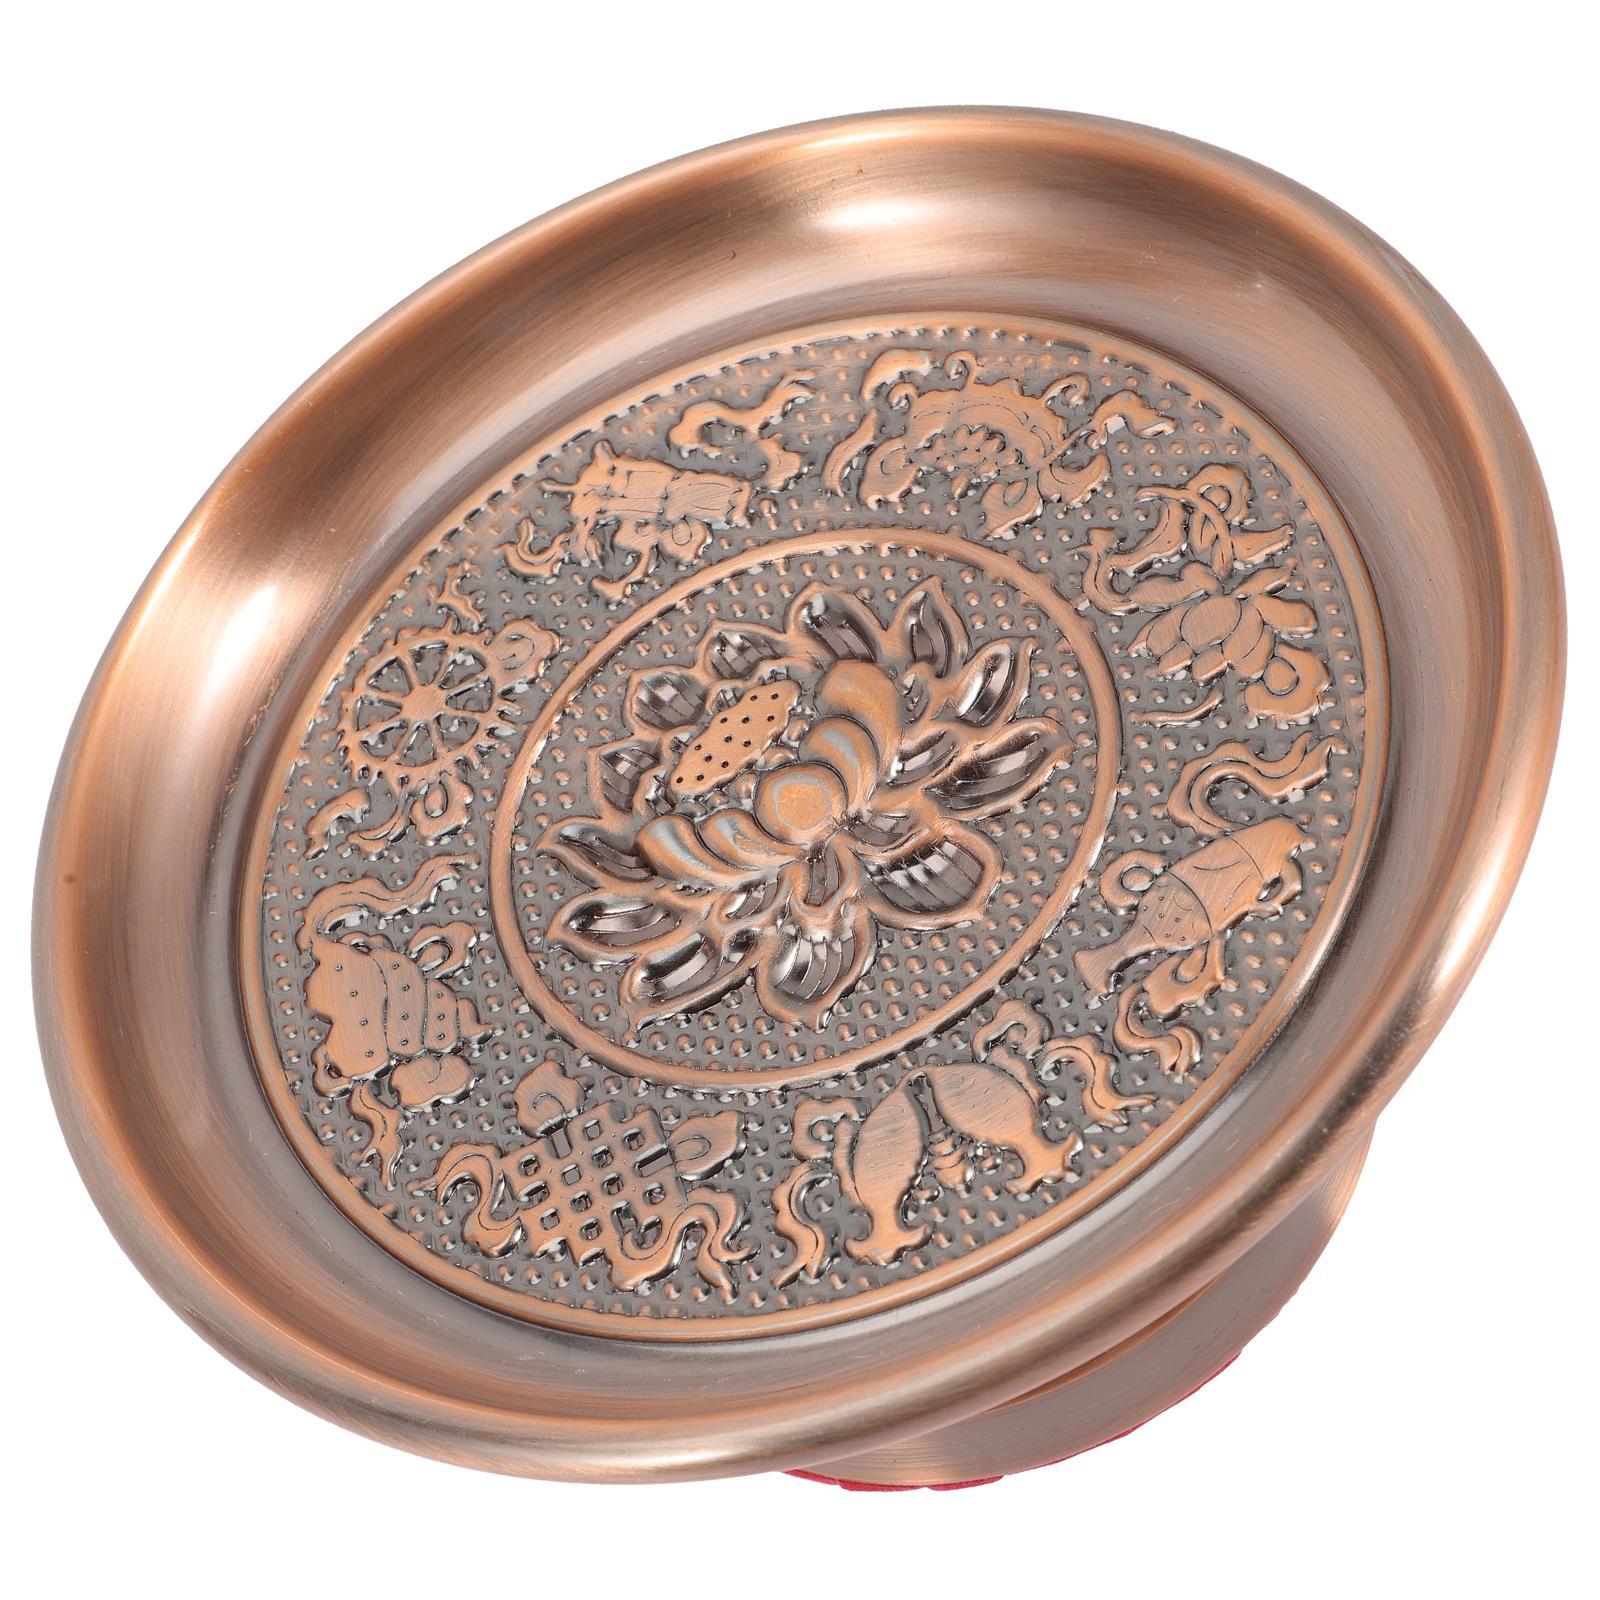 Fruit Dish Buddhist Altar Decorative Serving Tray Trays Decor Home Supplies Sacrificial Plate Alloy Lotus Fruit Plate